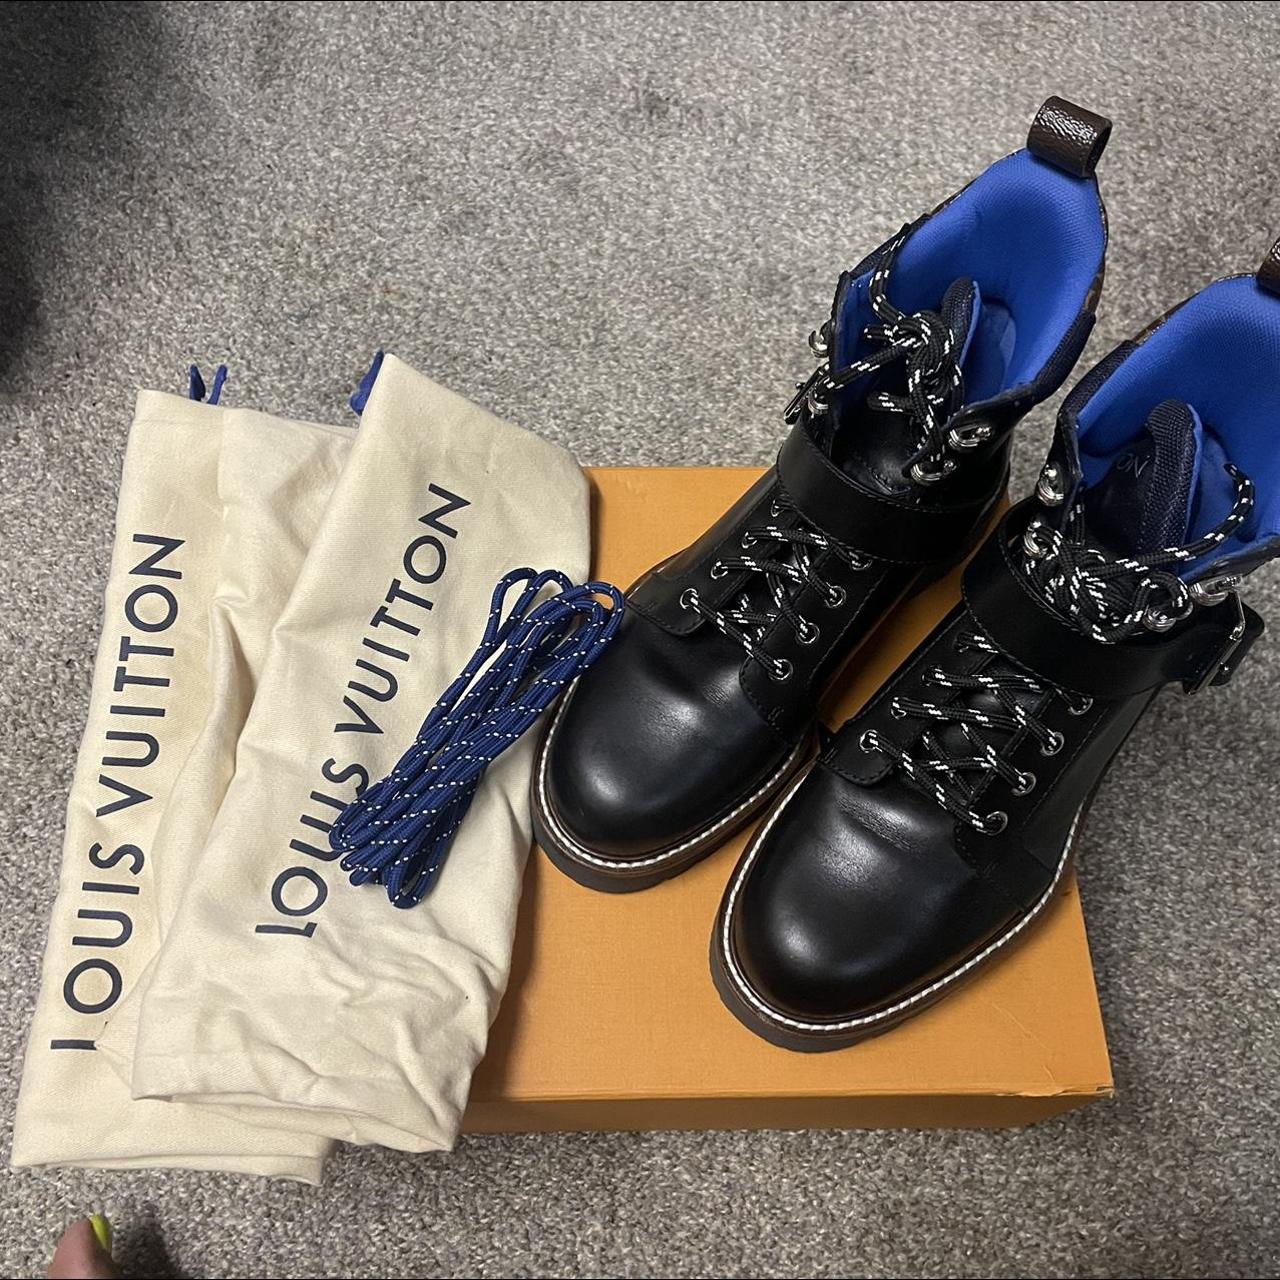 Louis Vuitton Territory Ranger Boots from 2022.